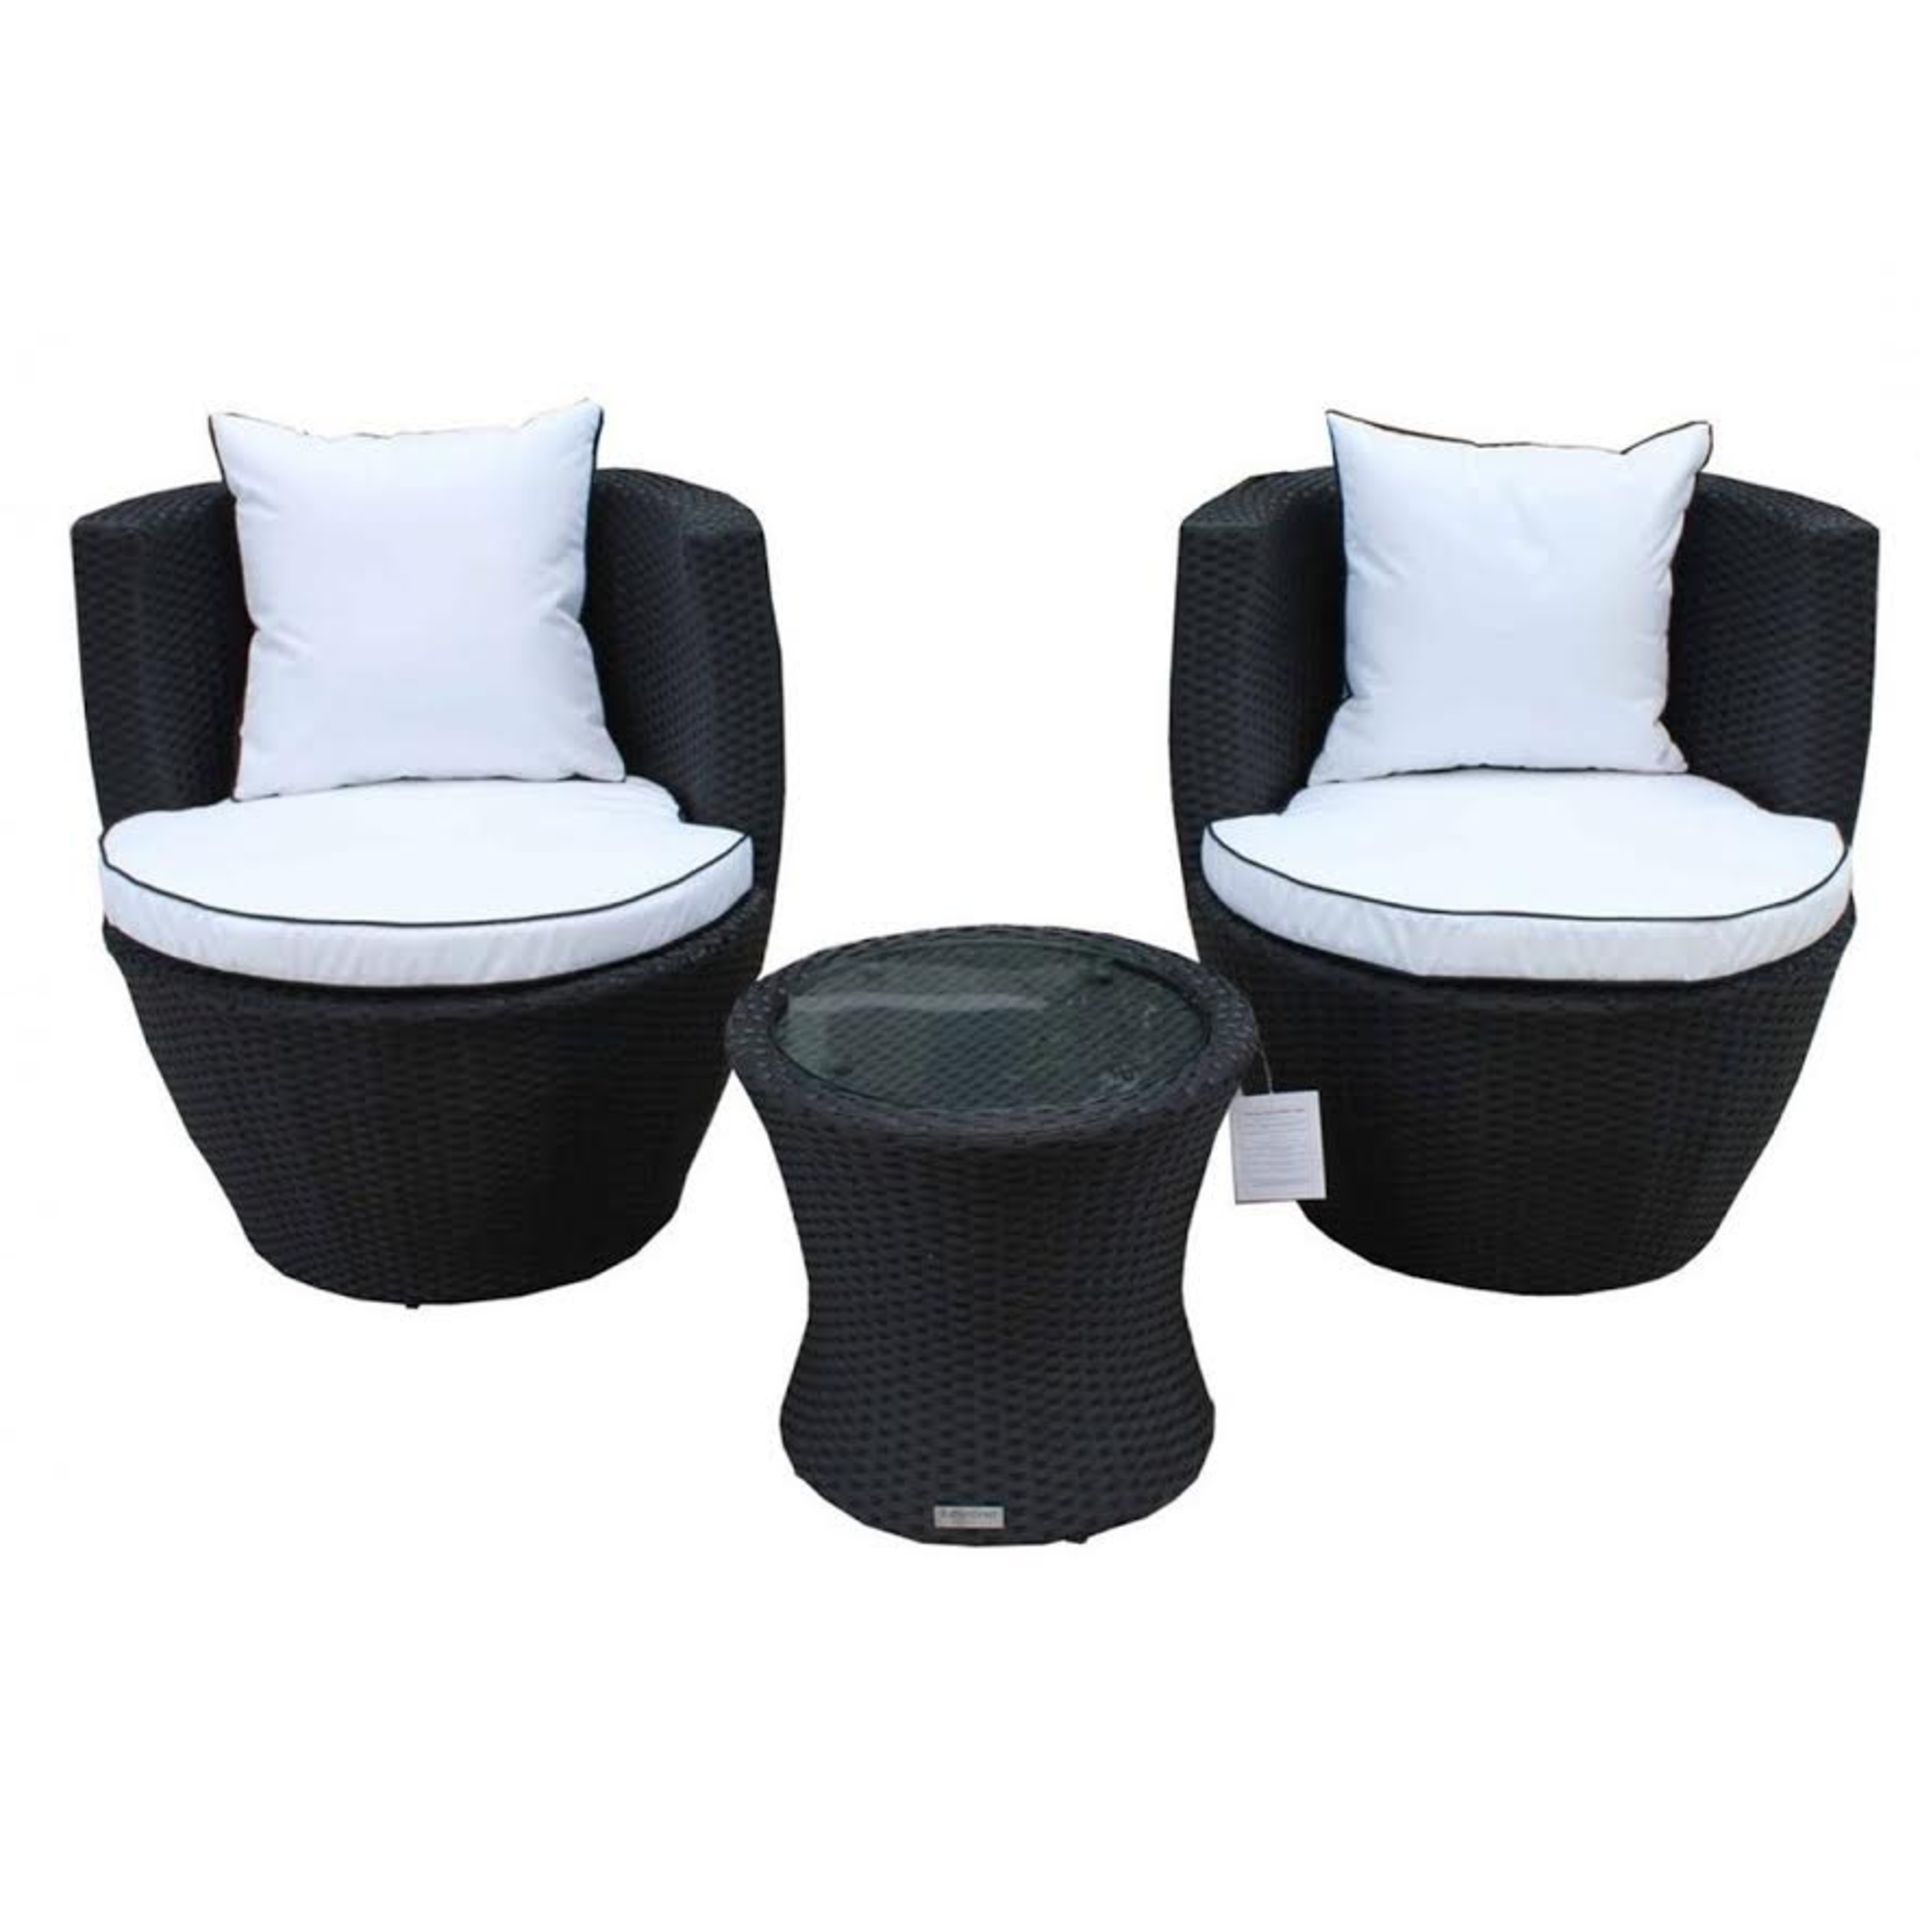 All Weather Rattan Vase Sets in Black and Vanilla Design: Black with Vanilla Cushions Finish: High - Image 2 of 2